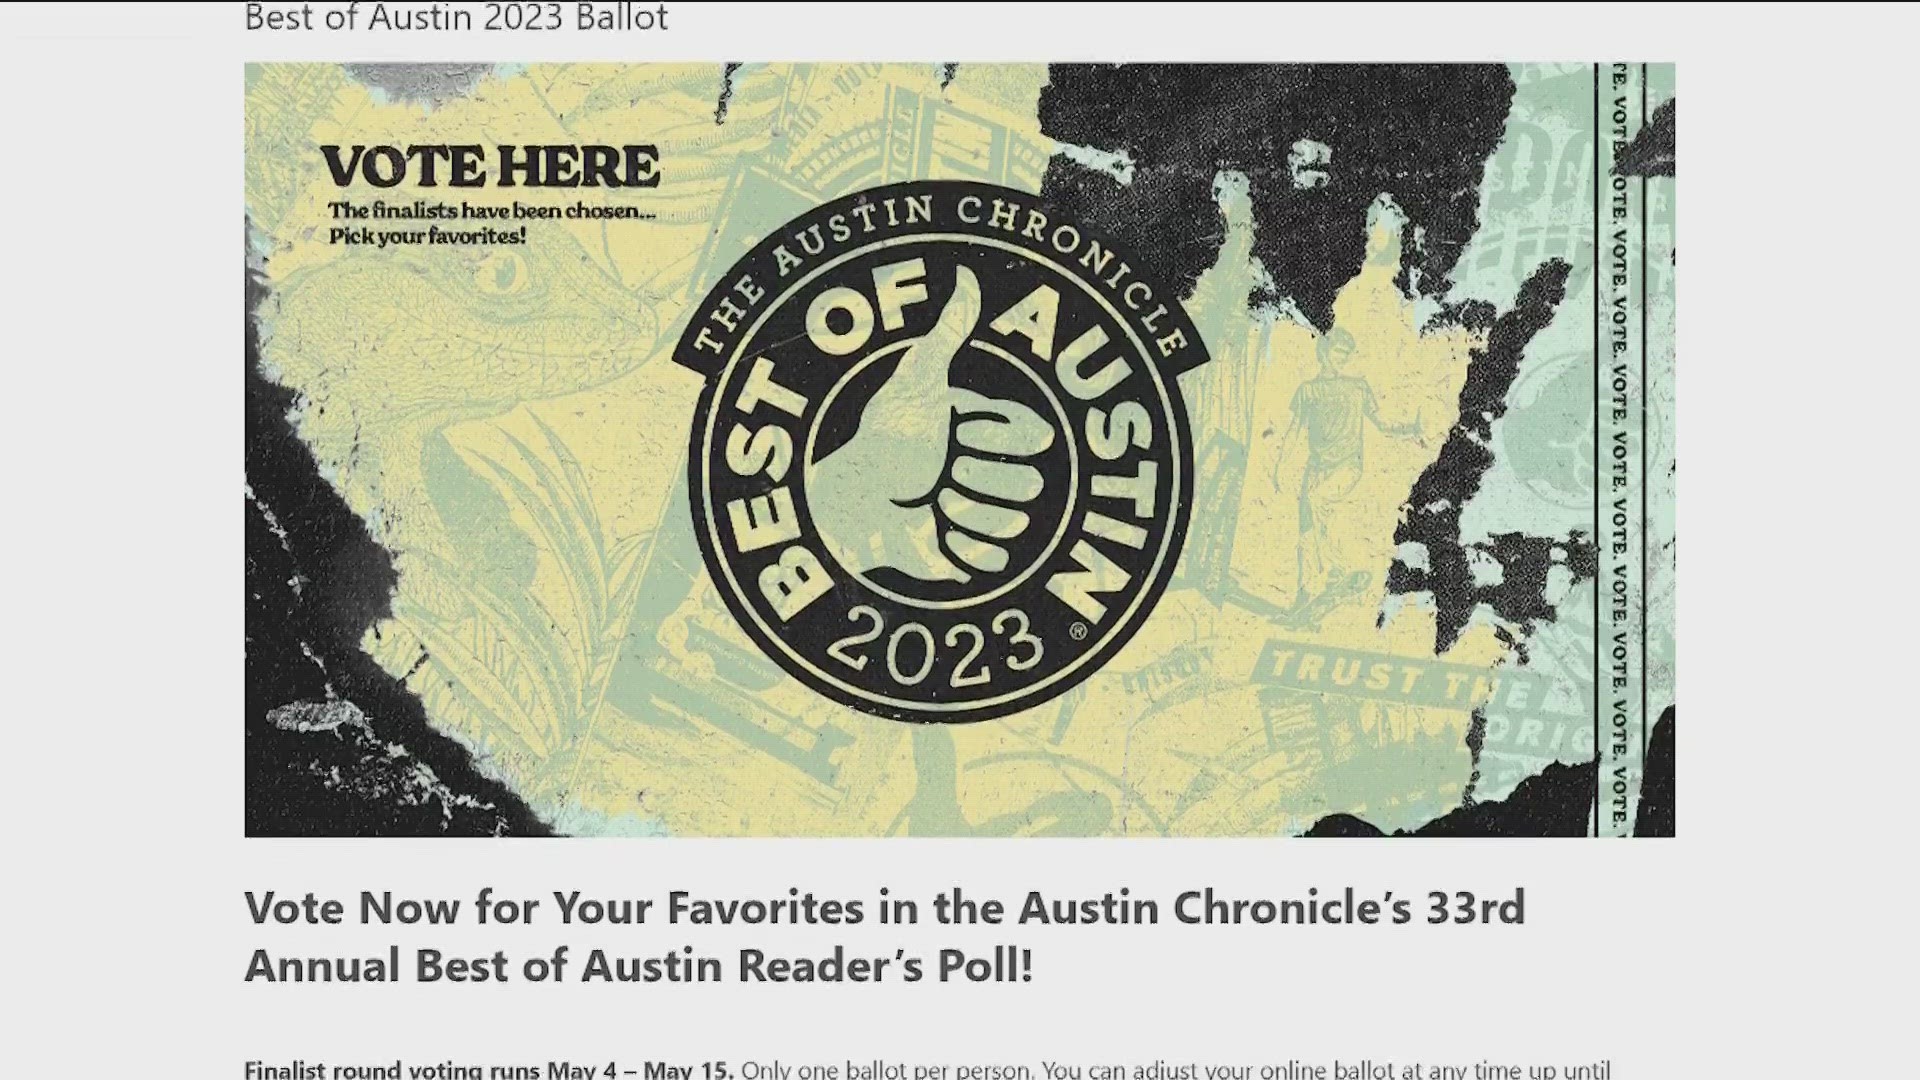 Voting for the "Best of Austin" finalists is now open.